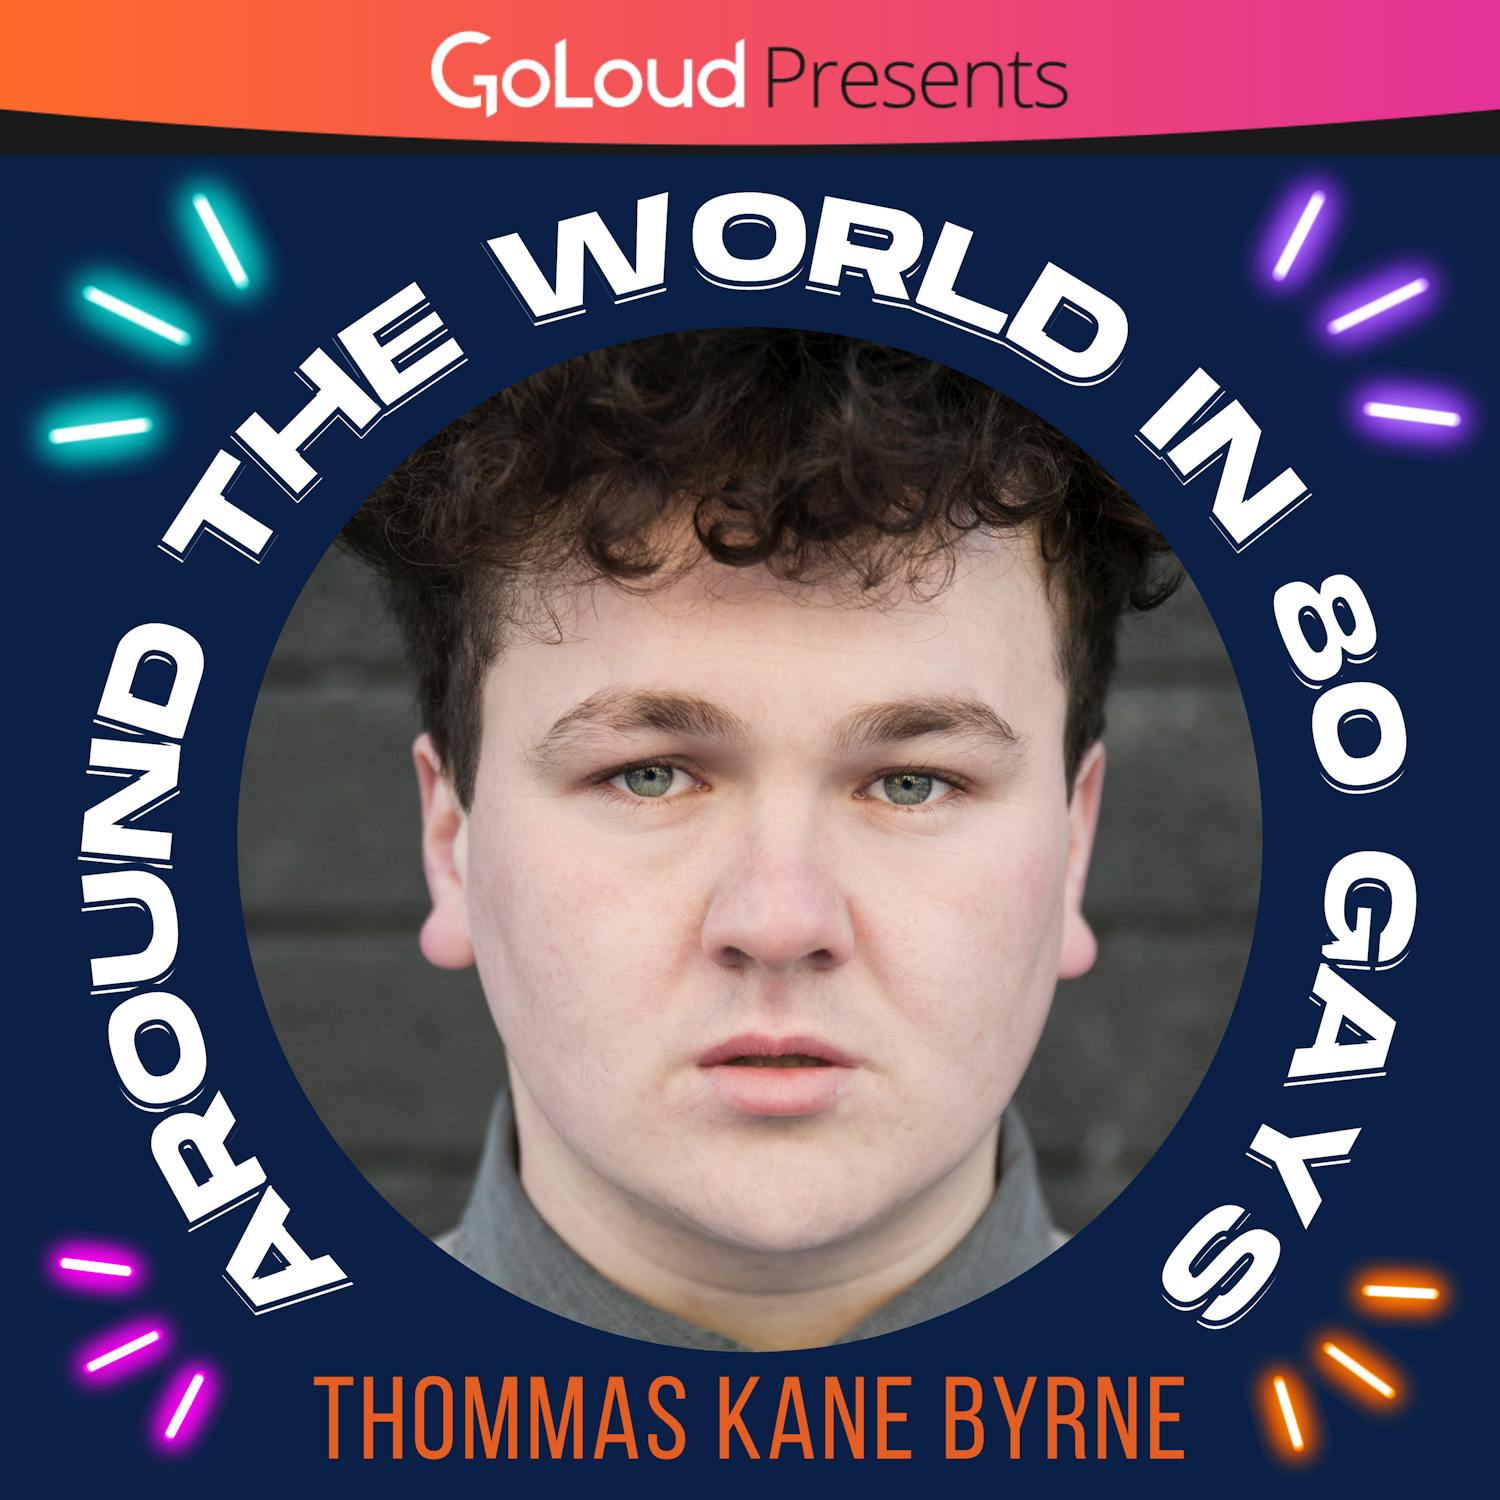 Around the World in 80 Gays meets Thommas Kane Byrne